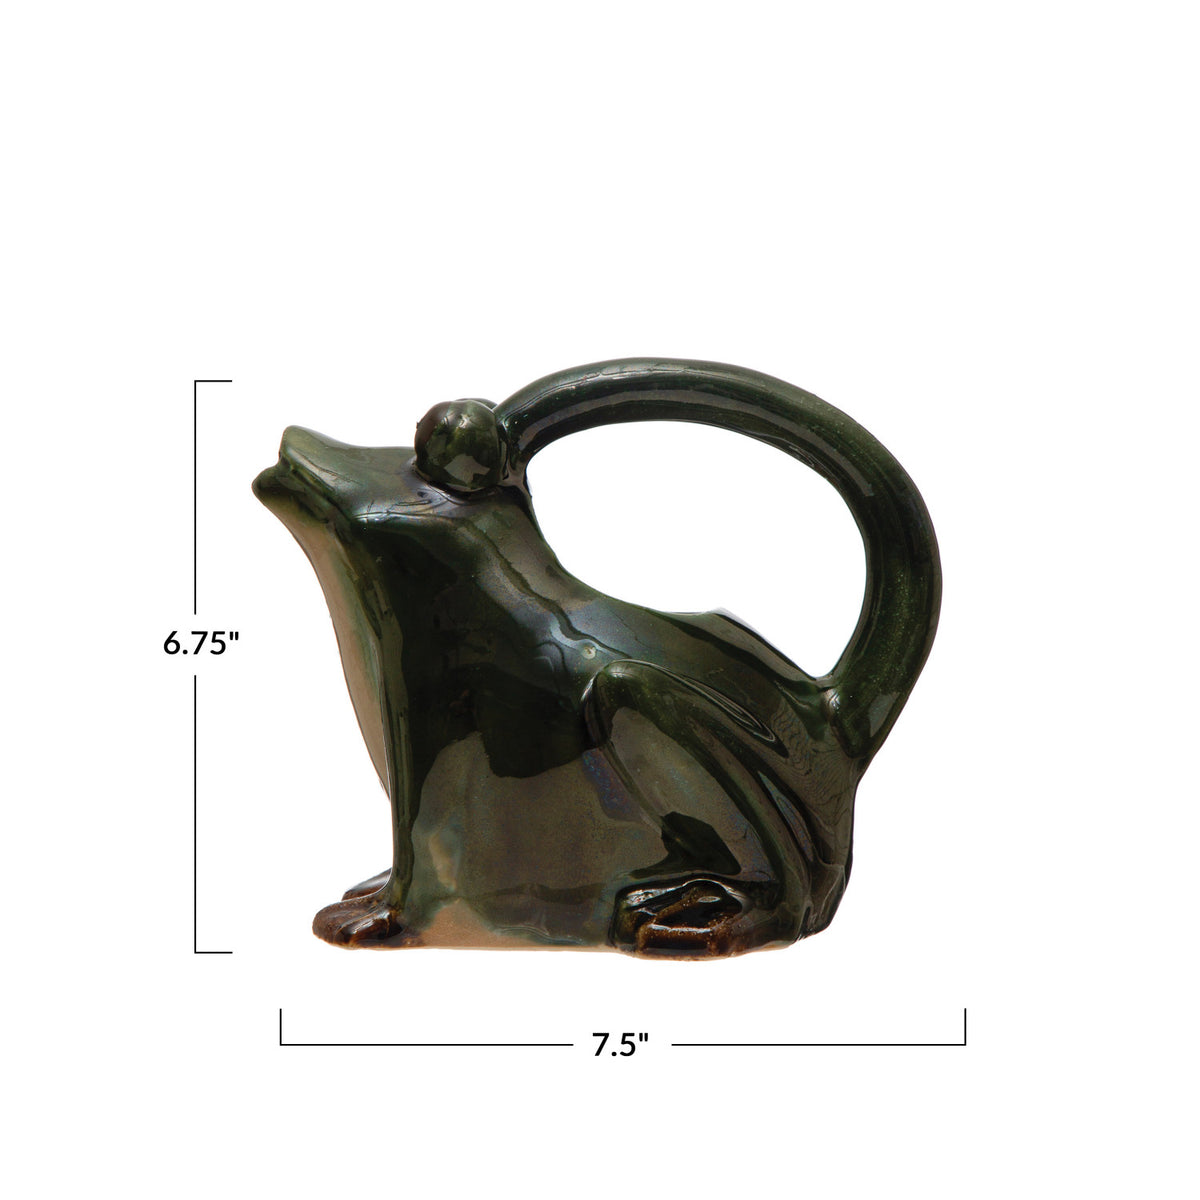 32oz Stoneware Frog Watering Pitcher, Green, White and Brown